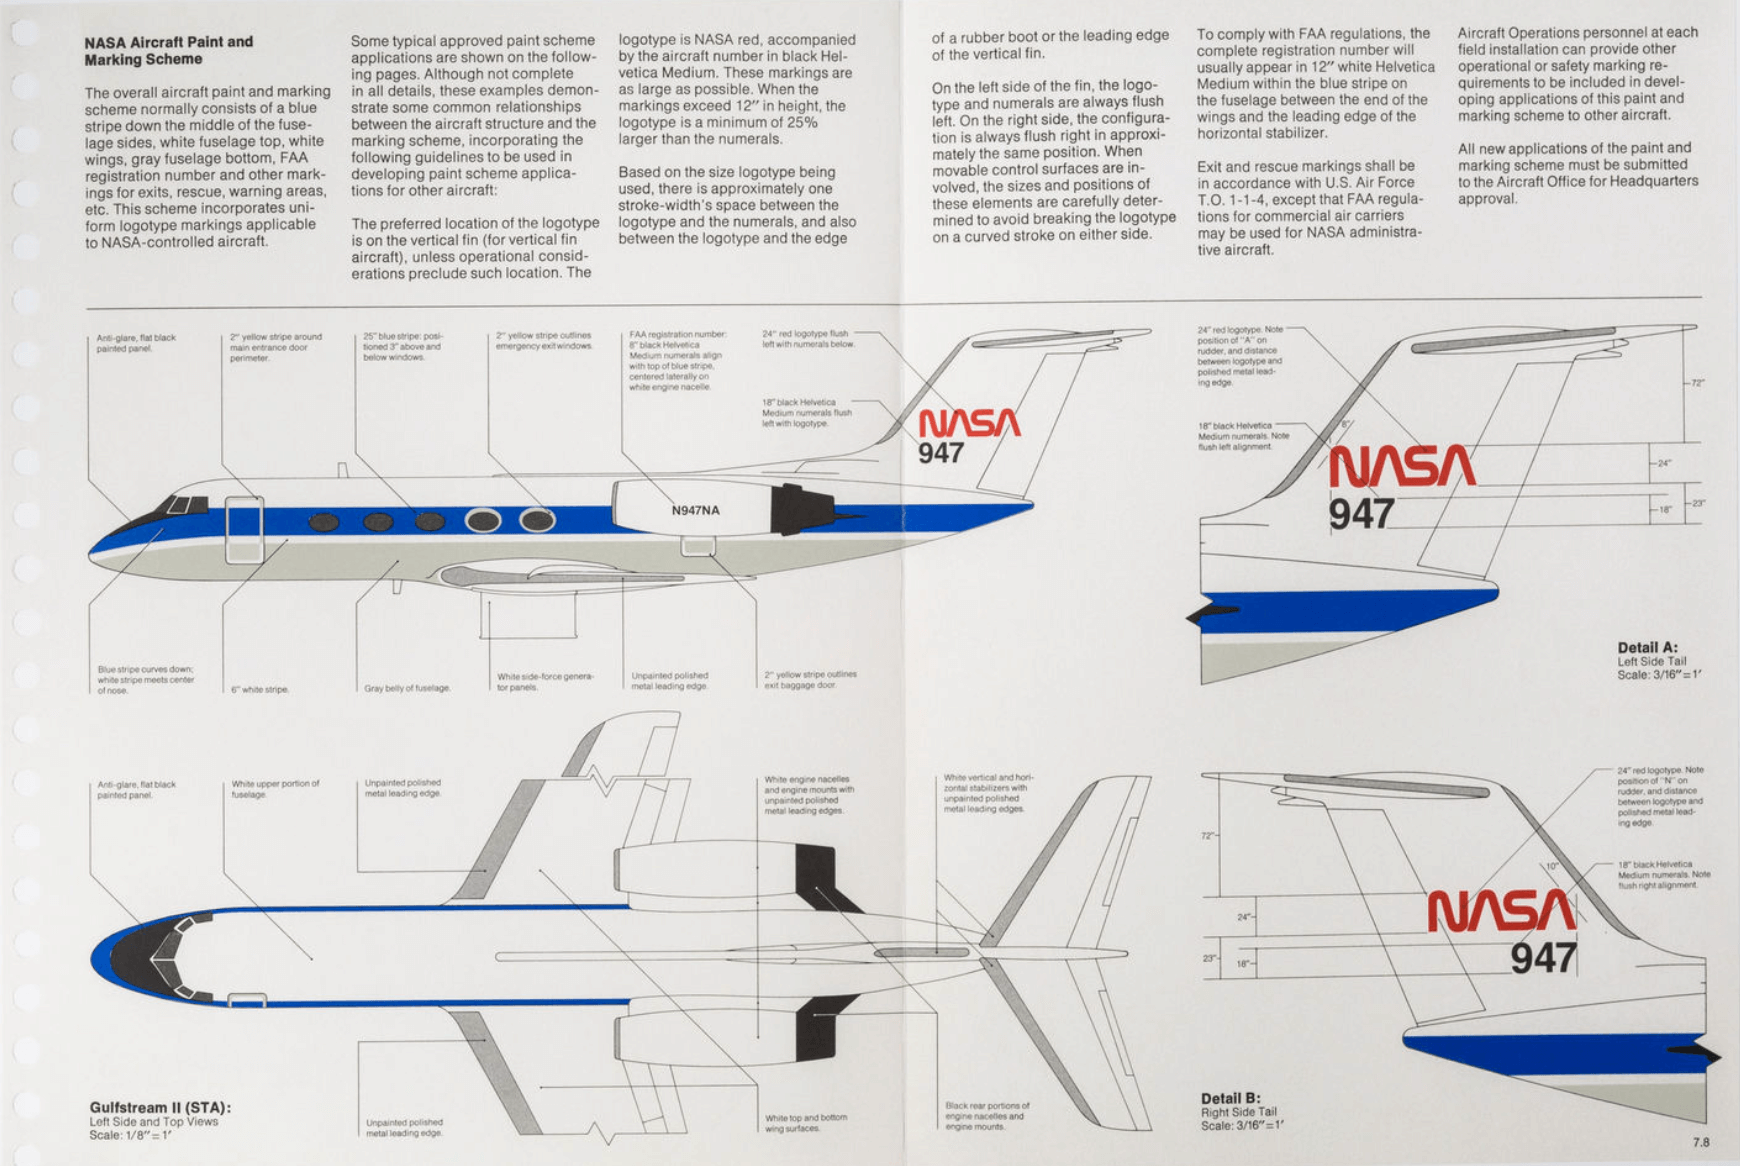 A page from NASA's brand book specifying proper logo placement on an aircraft